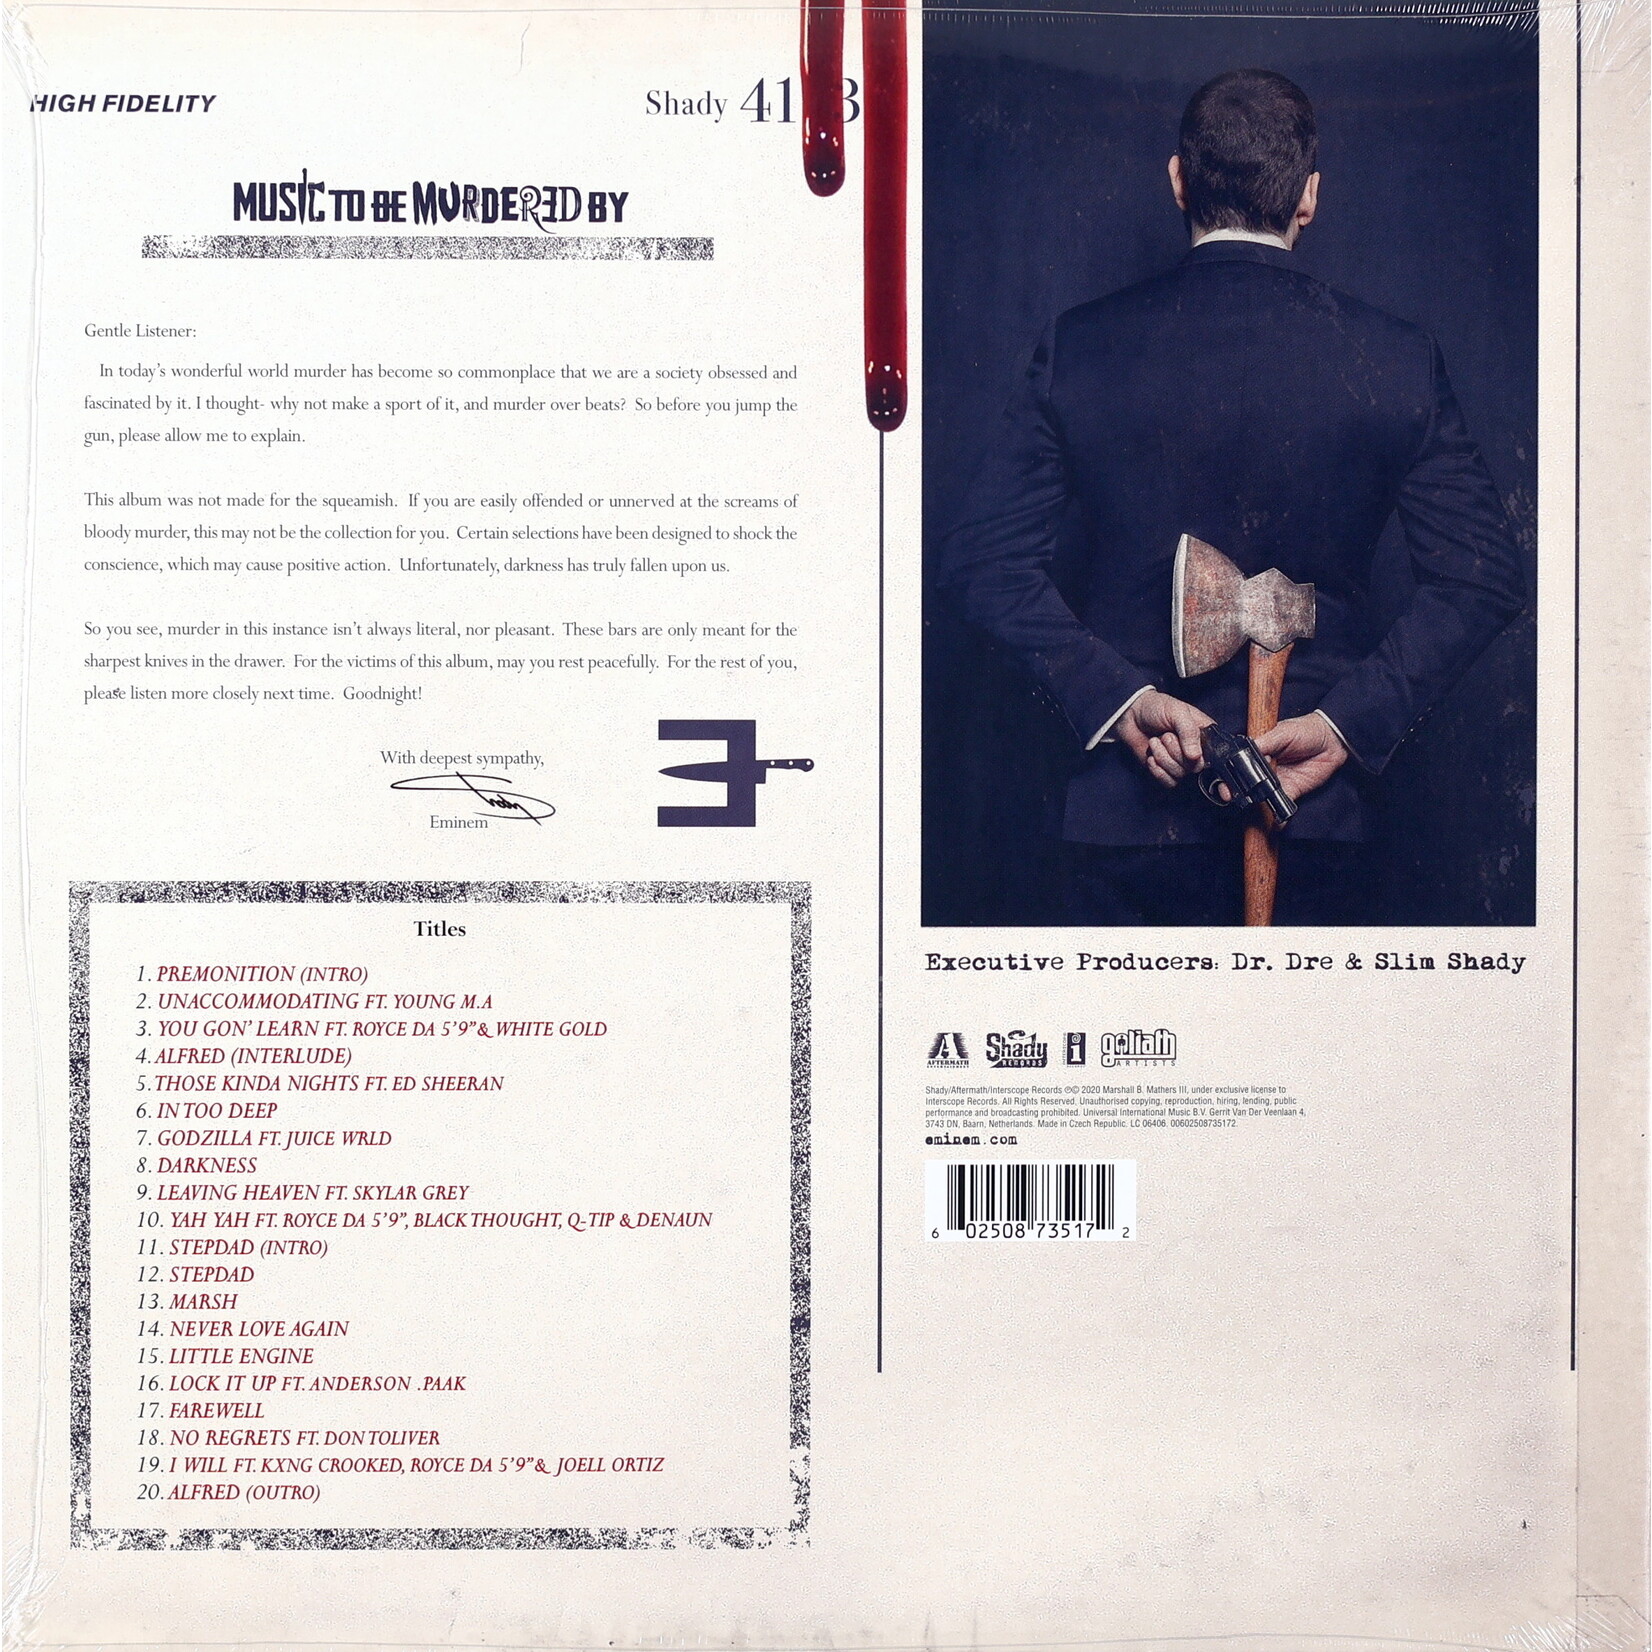 EMINEM - MUSIC TO BE MURDERED BY - GATEFOLD 2LP